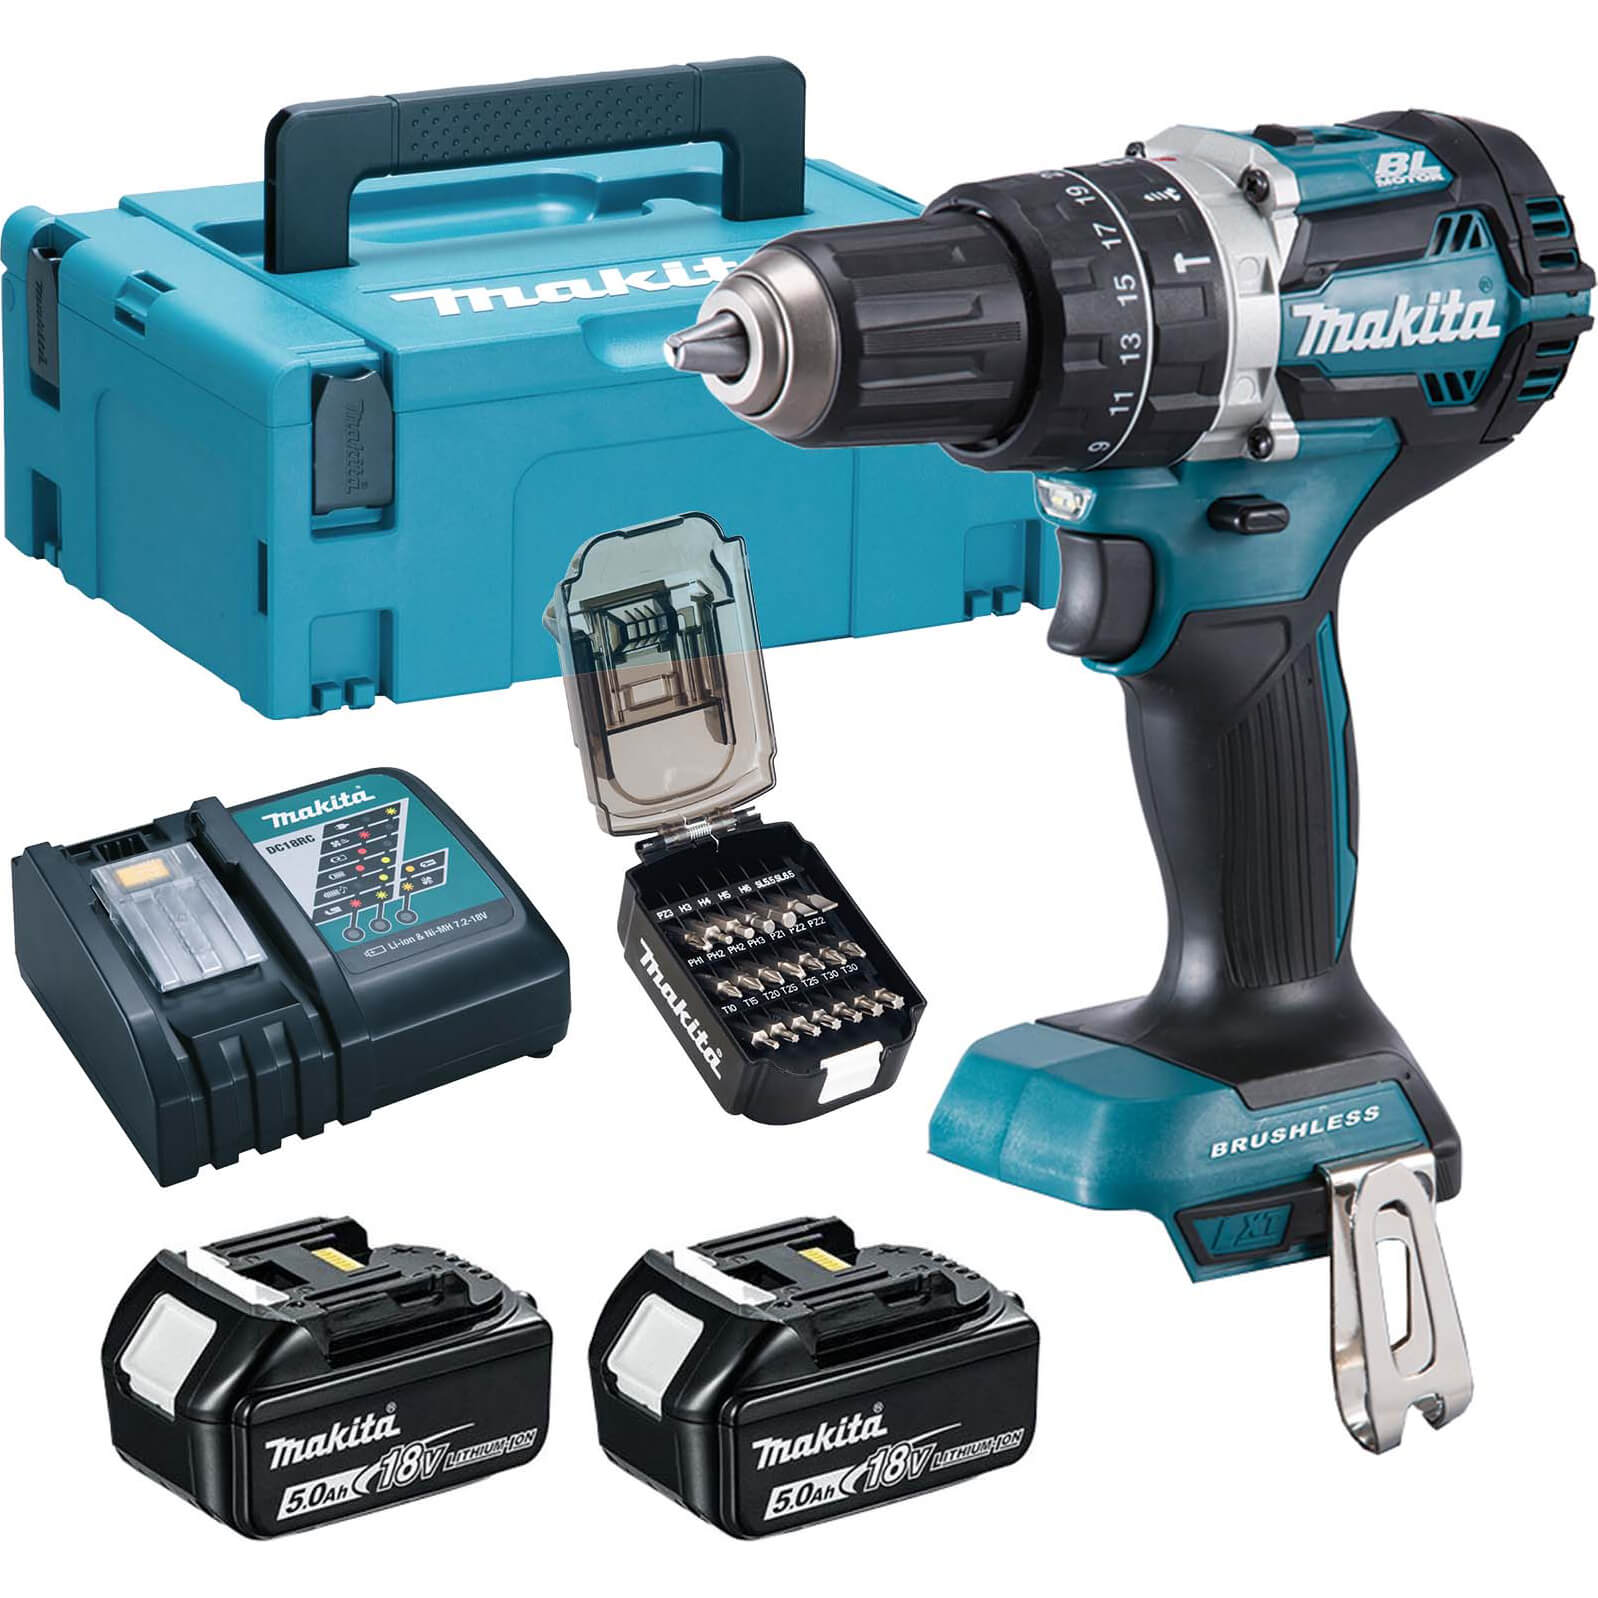 Image of Makita DHP484 18v LXT Cordless Brushless Combi Drill 2 x 5ah Li-ion Charger Case & 21 Accessories